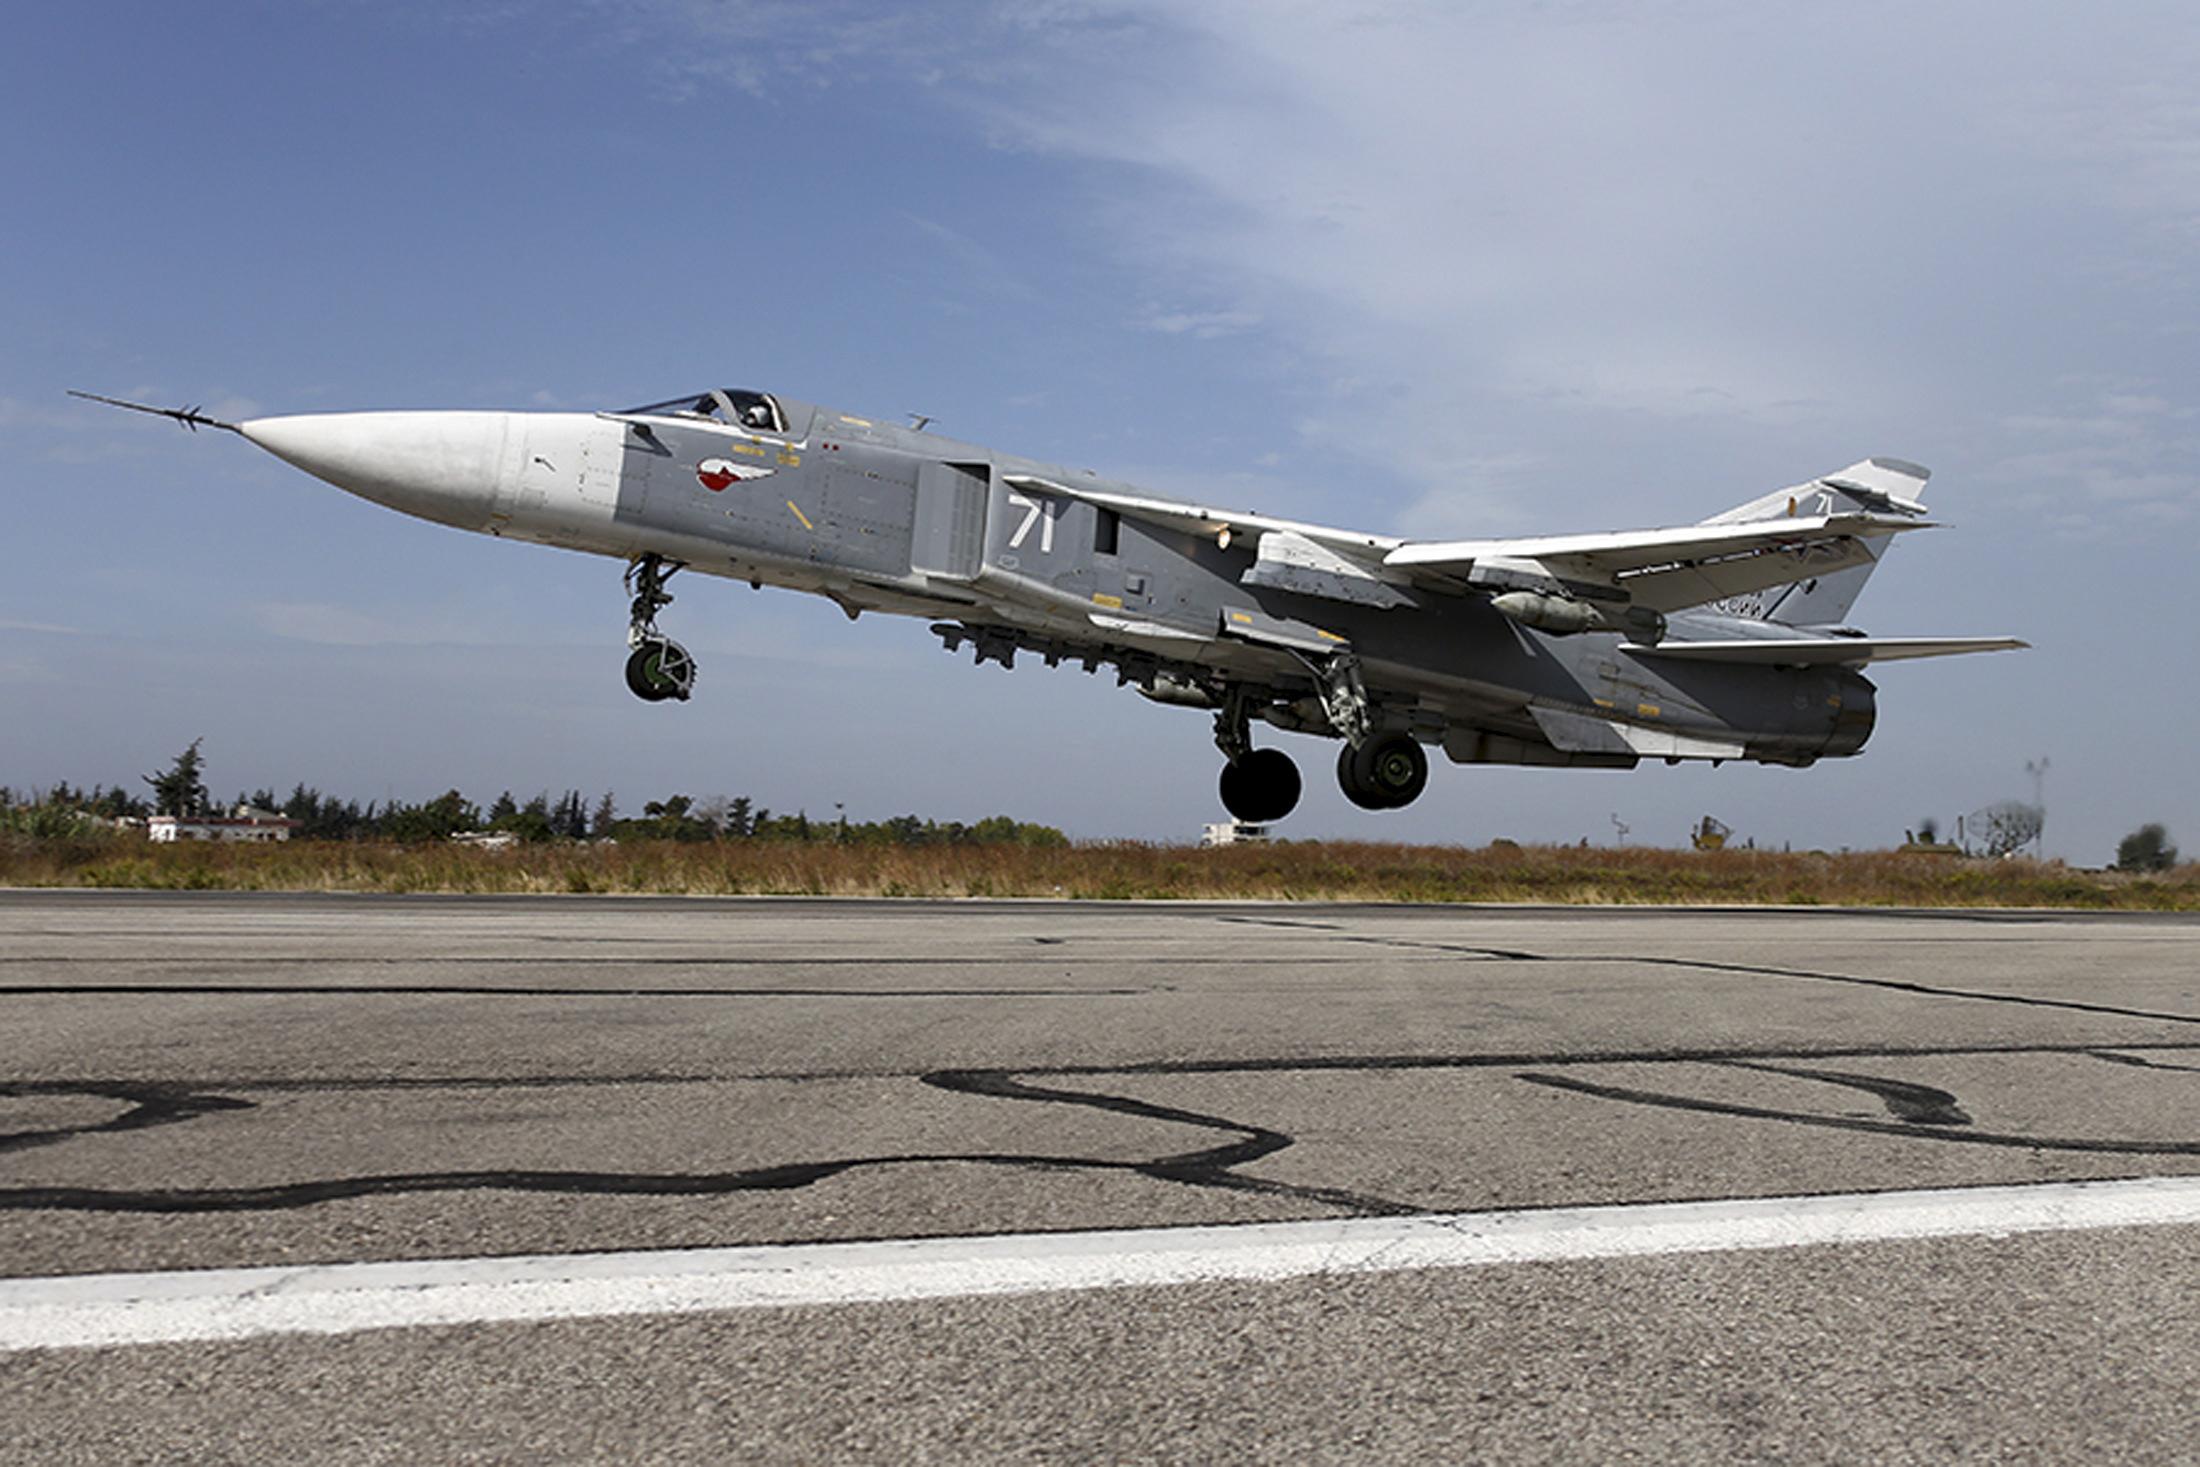 A Sukhoi Su-24 fighter jet takes off from the Hmeymim air base near Latakia, Syria, in this handout photograph released by Russia's Defence Ministry on 22 October, 2015. Russian, Syrian and US-led coalition aircraft are known to conduct sorties in the area hit on Wednesday